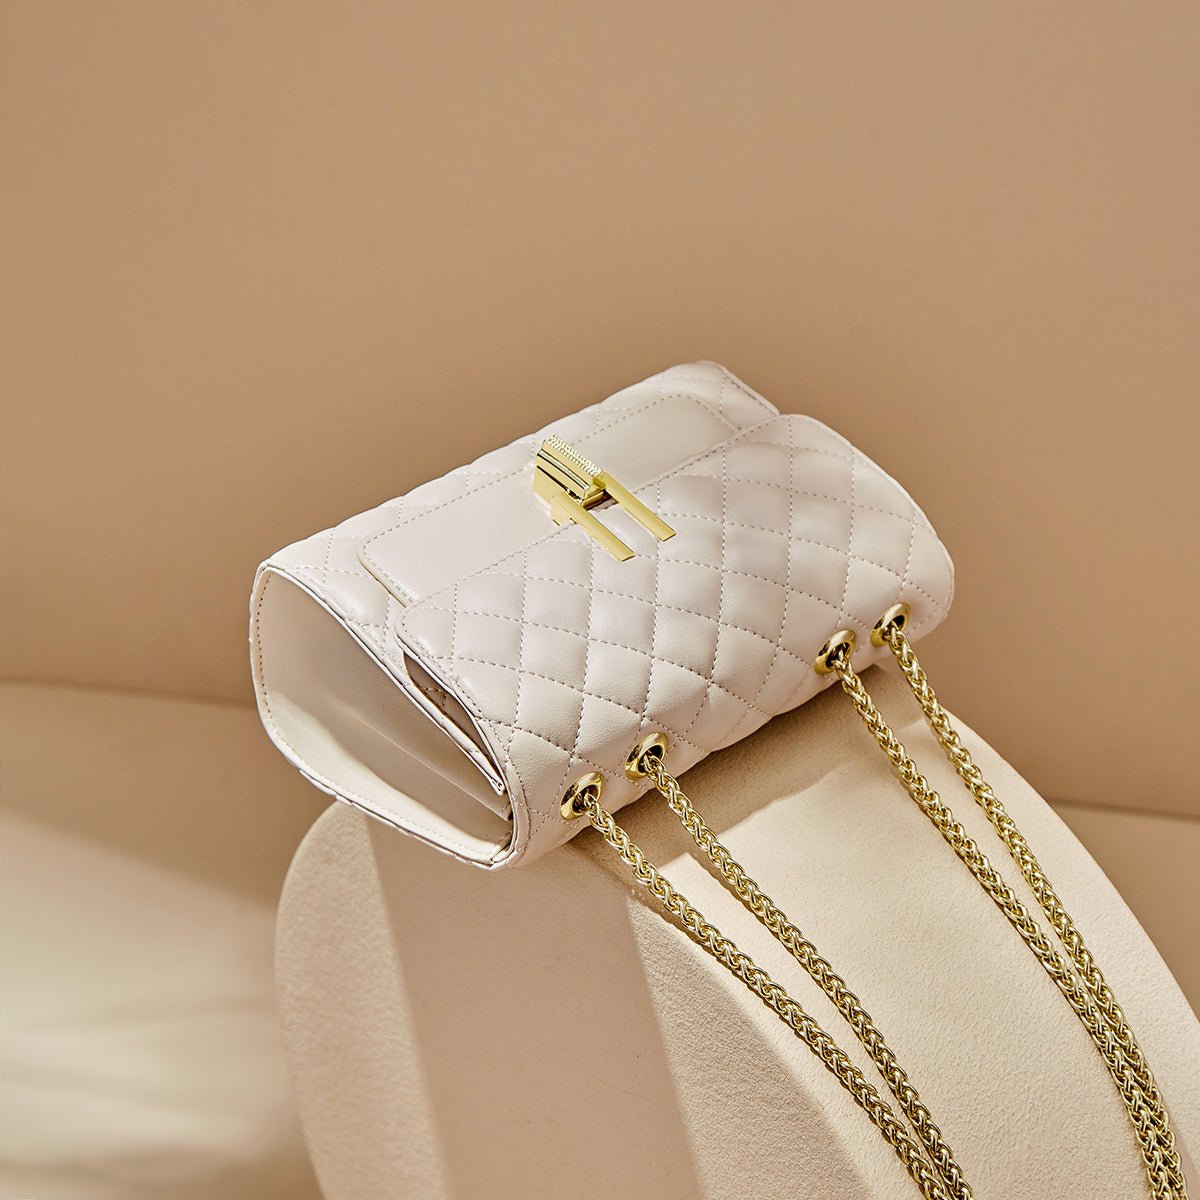 Classic White Quilted Scarlett Shoulder Bag - 0cm